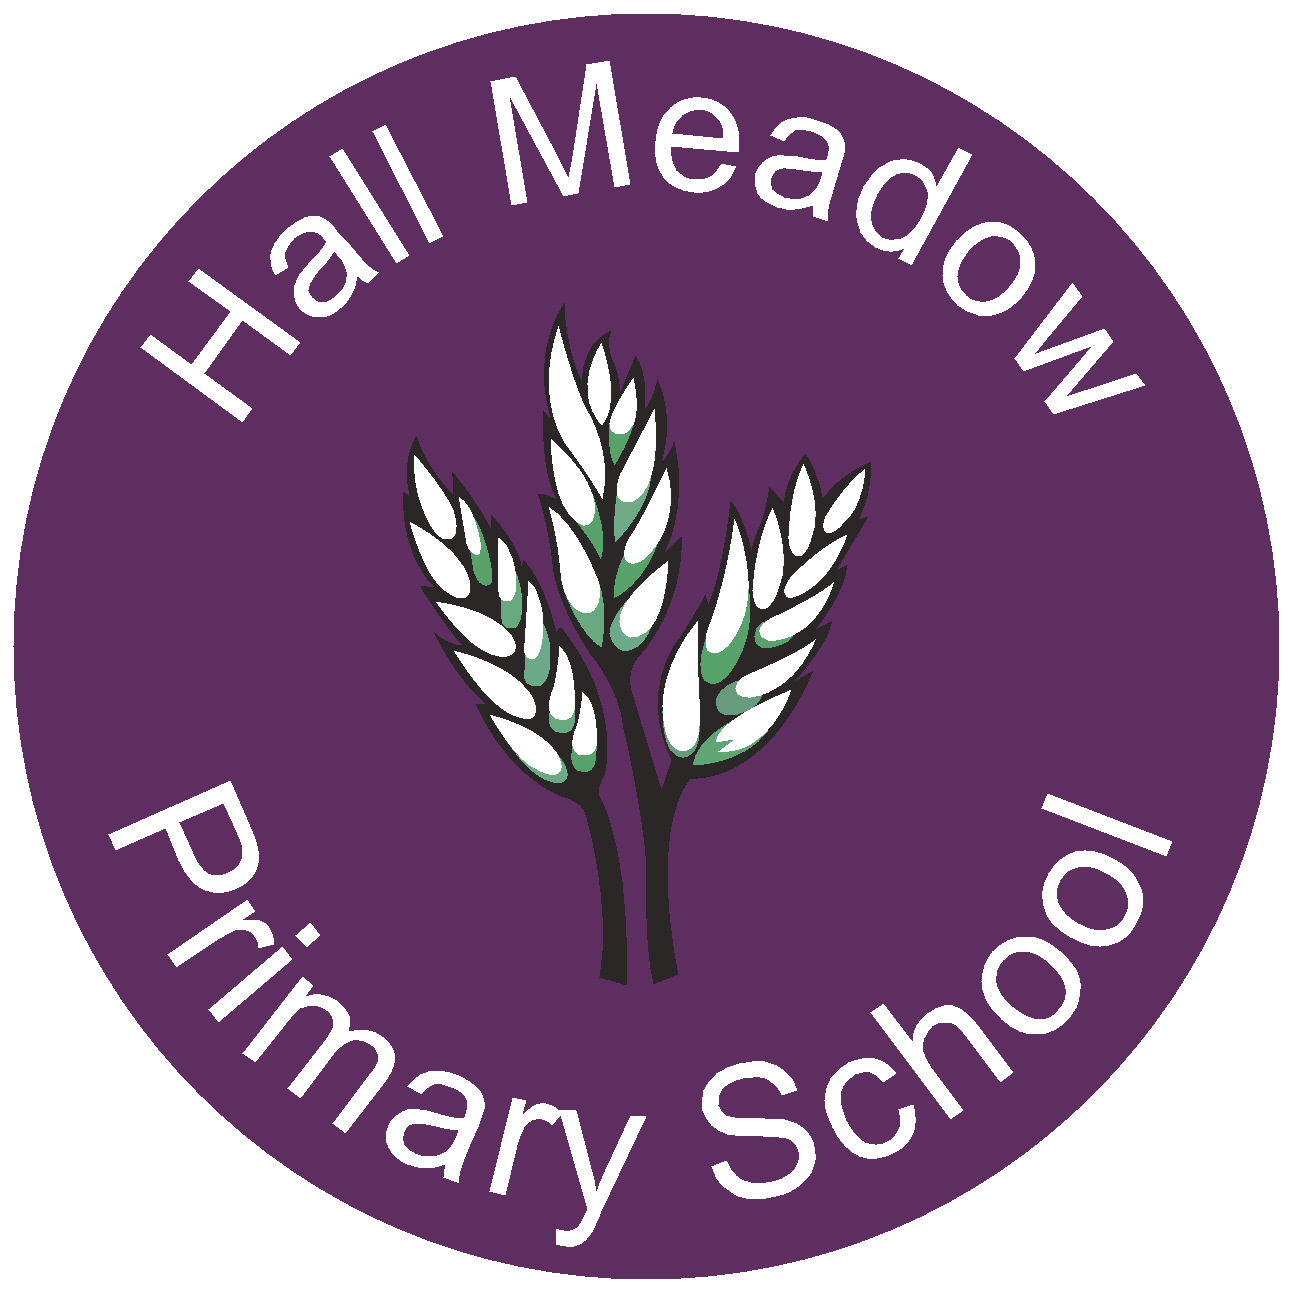 Hall Meadow Primary